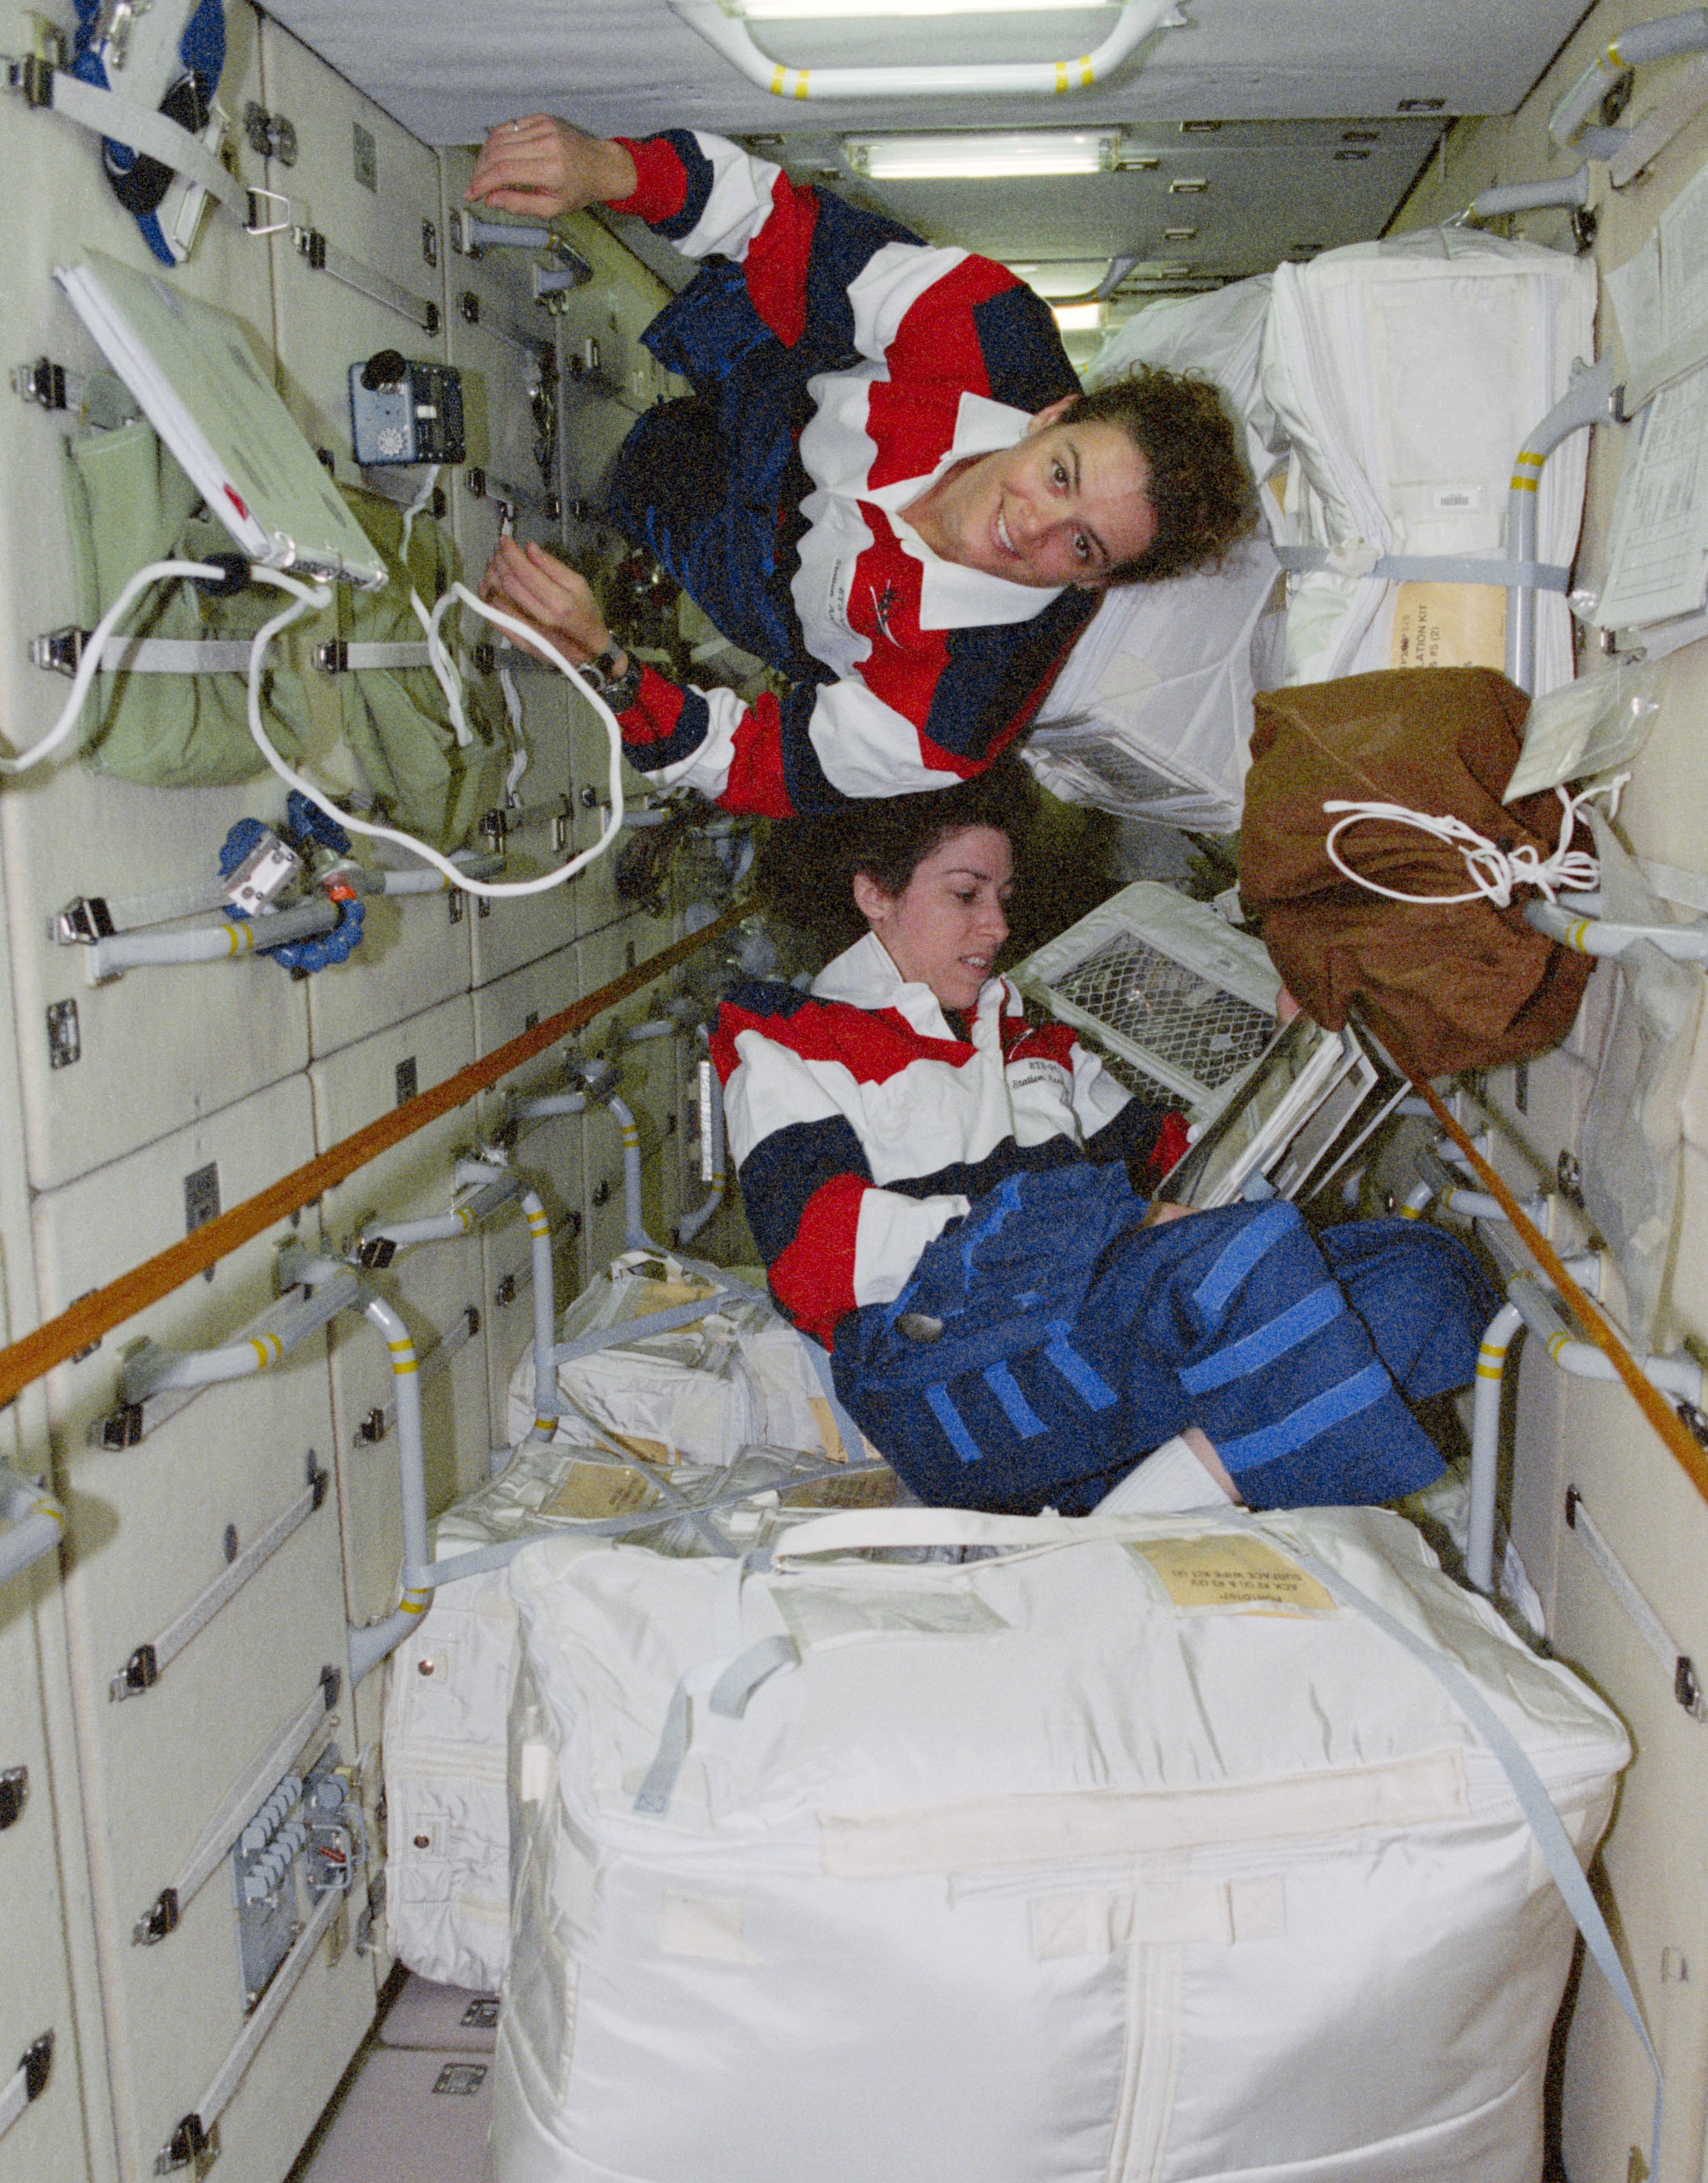 Ochoa with fellow STS-96 crewmembers Julie Payette of the Canadian Space Agency in the Zarya module.